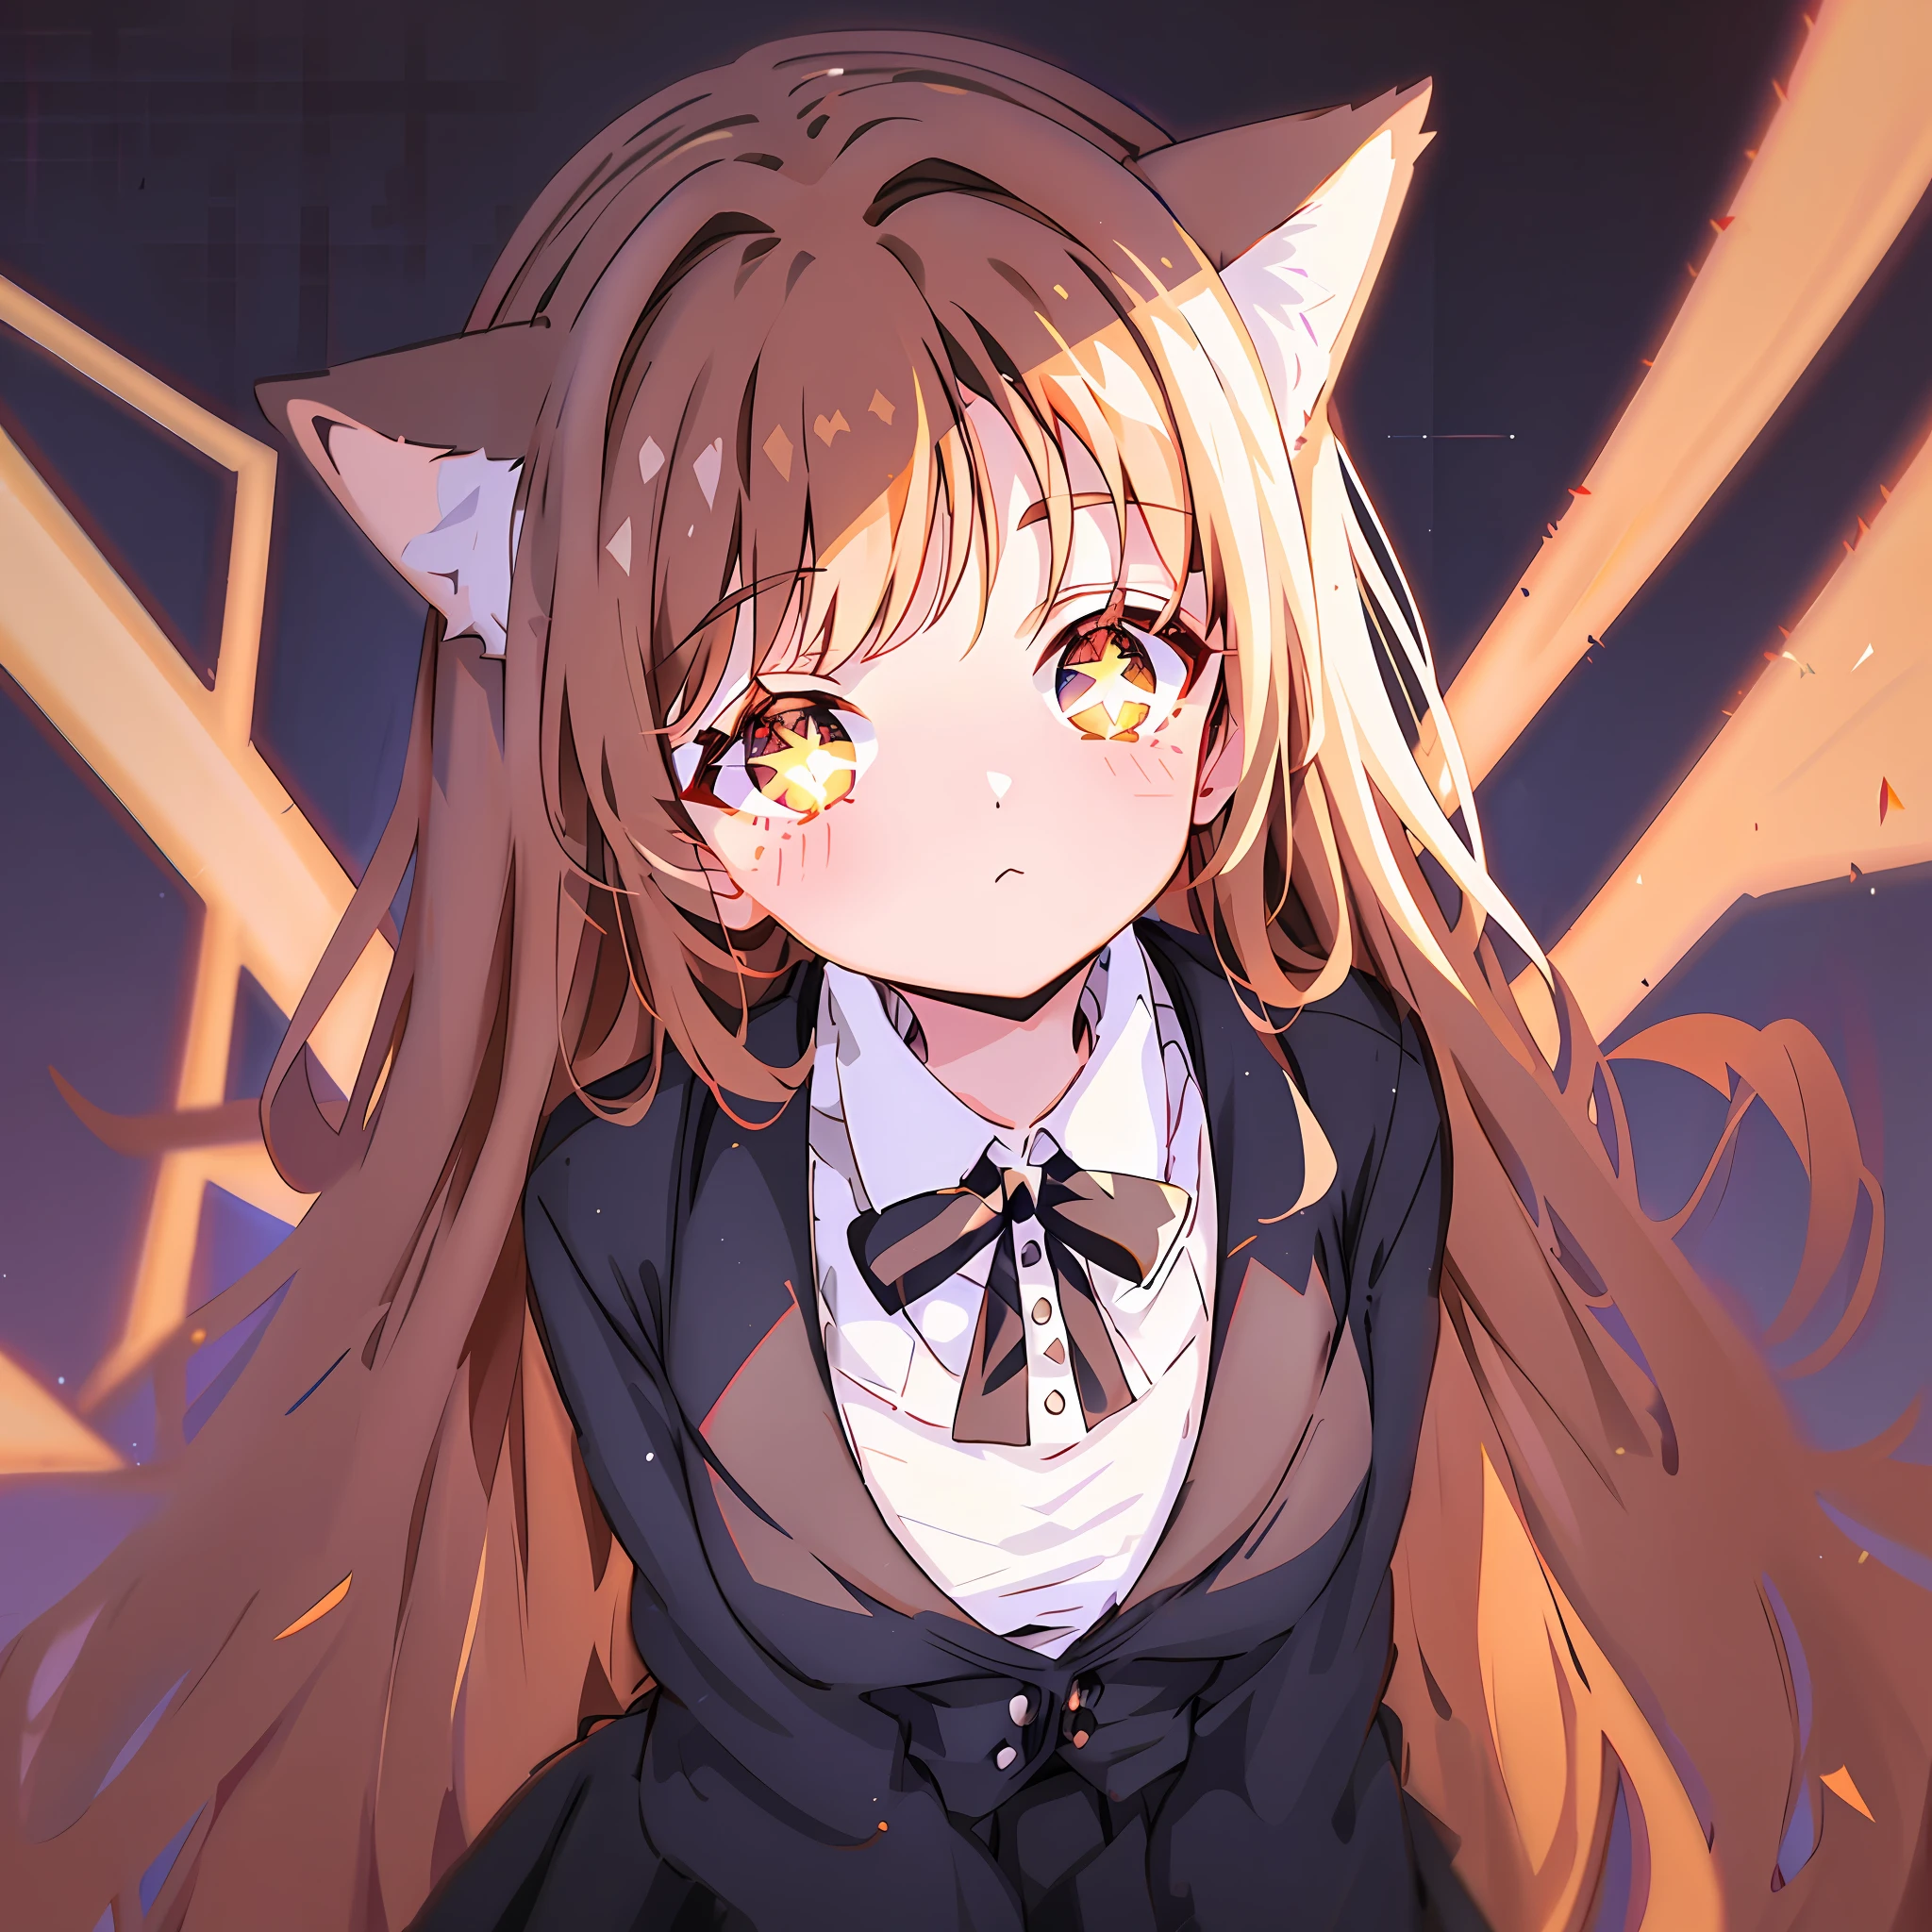 ((Catgirl, Upper Body)), ((Gorgeous Starry Sky Background)), ((Super Definition)), ((Best Illustration)), ((Cinematic Lighting)), Dynamic Angle, Detail, (Glitter: 1.2), (Shine: 1.2), (Paint: 1.1), (Best Quality), (Masterpiece: 1.2), (Anime Style), (Solo), Beautiful Detail Face, (Cute Face, Looking Up: 1.4), (Big Eyes: 1.3), (Amber Eyes: 1.4), Dark Cinnamon-colored Hair And Cat Ears, (Medium Hair: 1.2), (Floating Hair: 1.2), (Dark Cinnamon-Colored Cat Ears: 1.3), (Gargantuan Breasts: 1.6), (High School Student Costume: 1.4), (Short Black Shirt and Blazer: 1.5), Detailed Costumes, ( Pleated Black Skirt: 1.3), (Transparent Fabric: 1.1), (Glitter: 1.2), (Glow: 1.2), (Shine: 1.2), ( Flicker:1.2), (Dazzle:1.2)